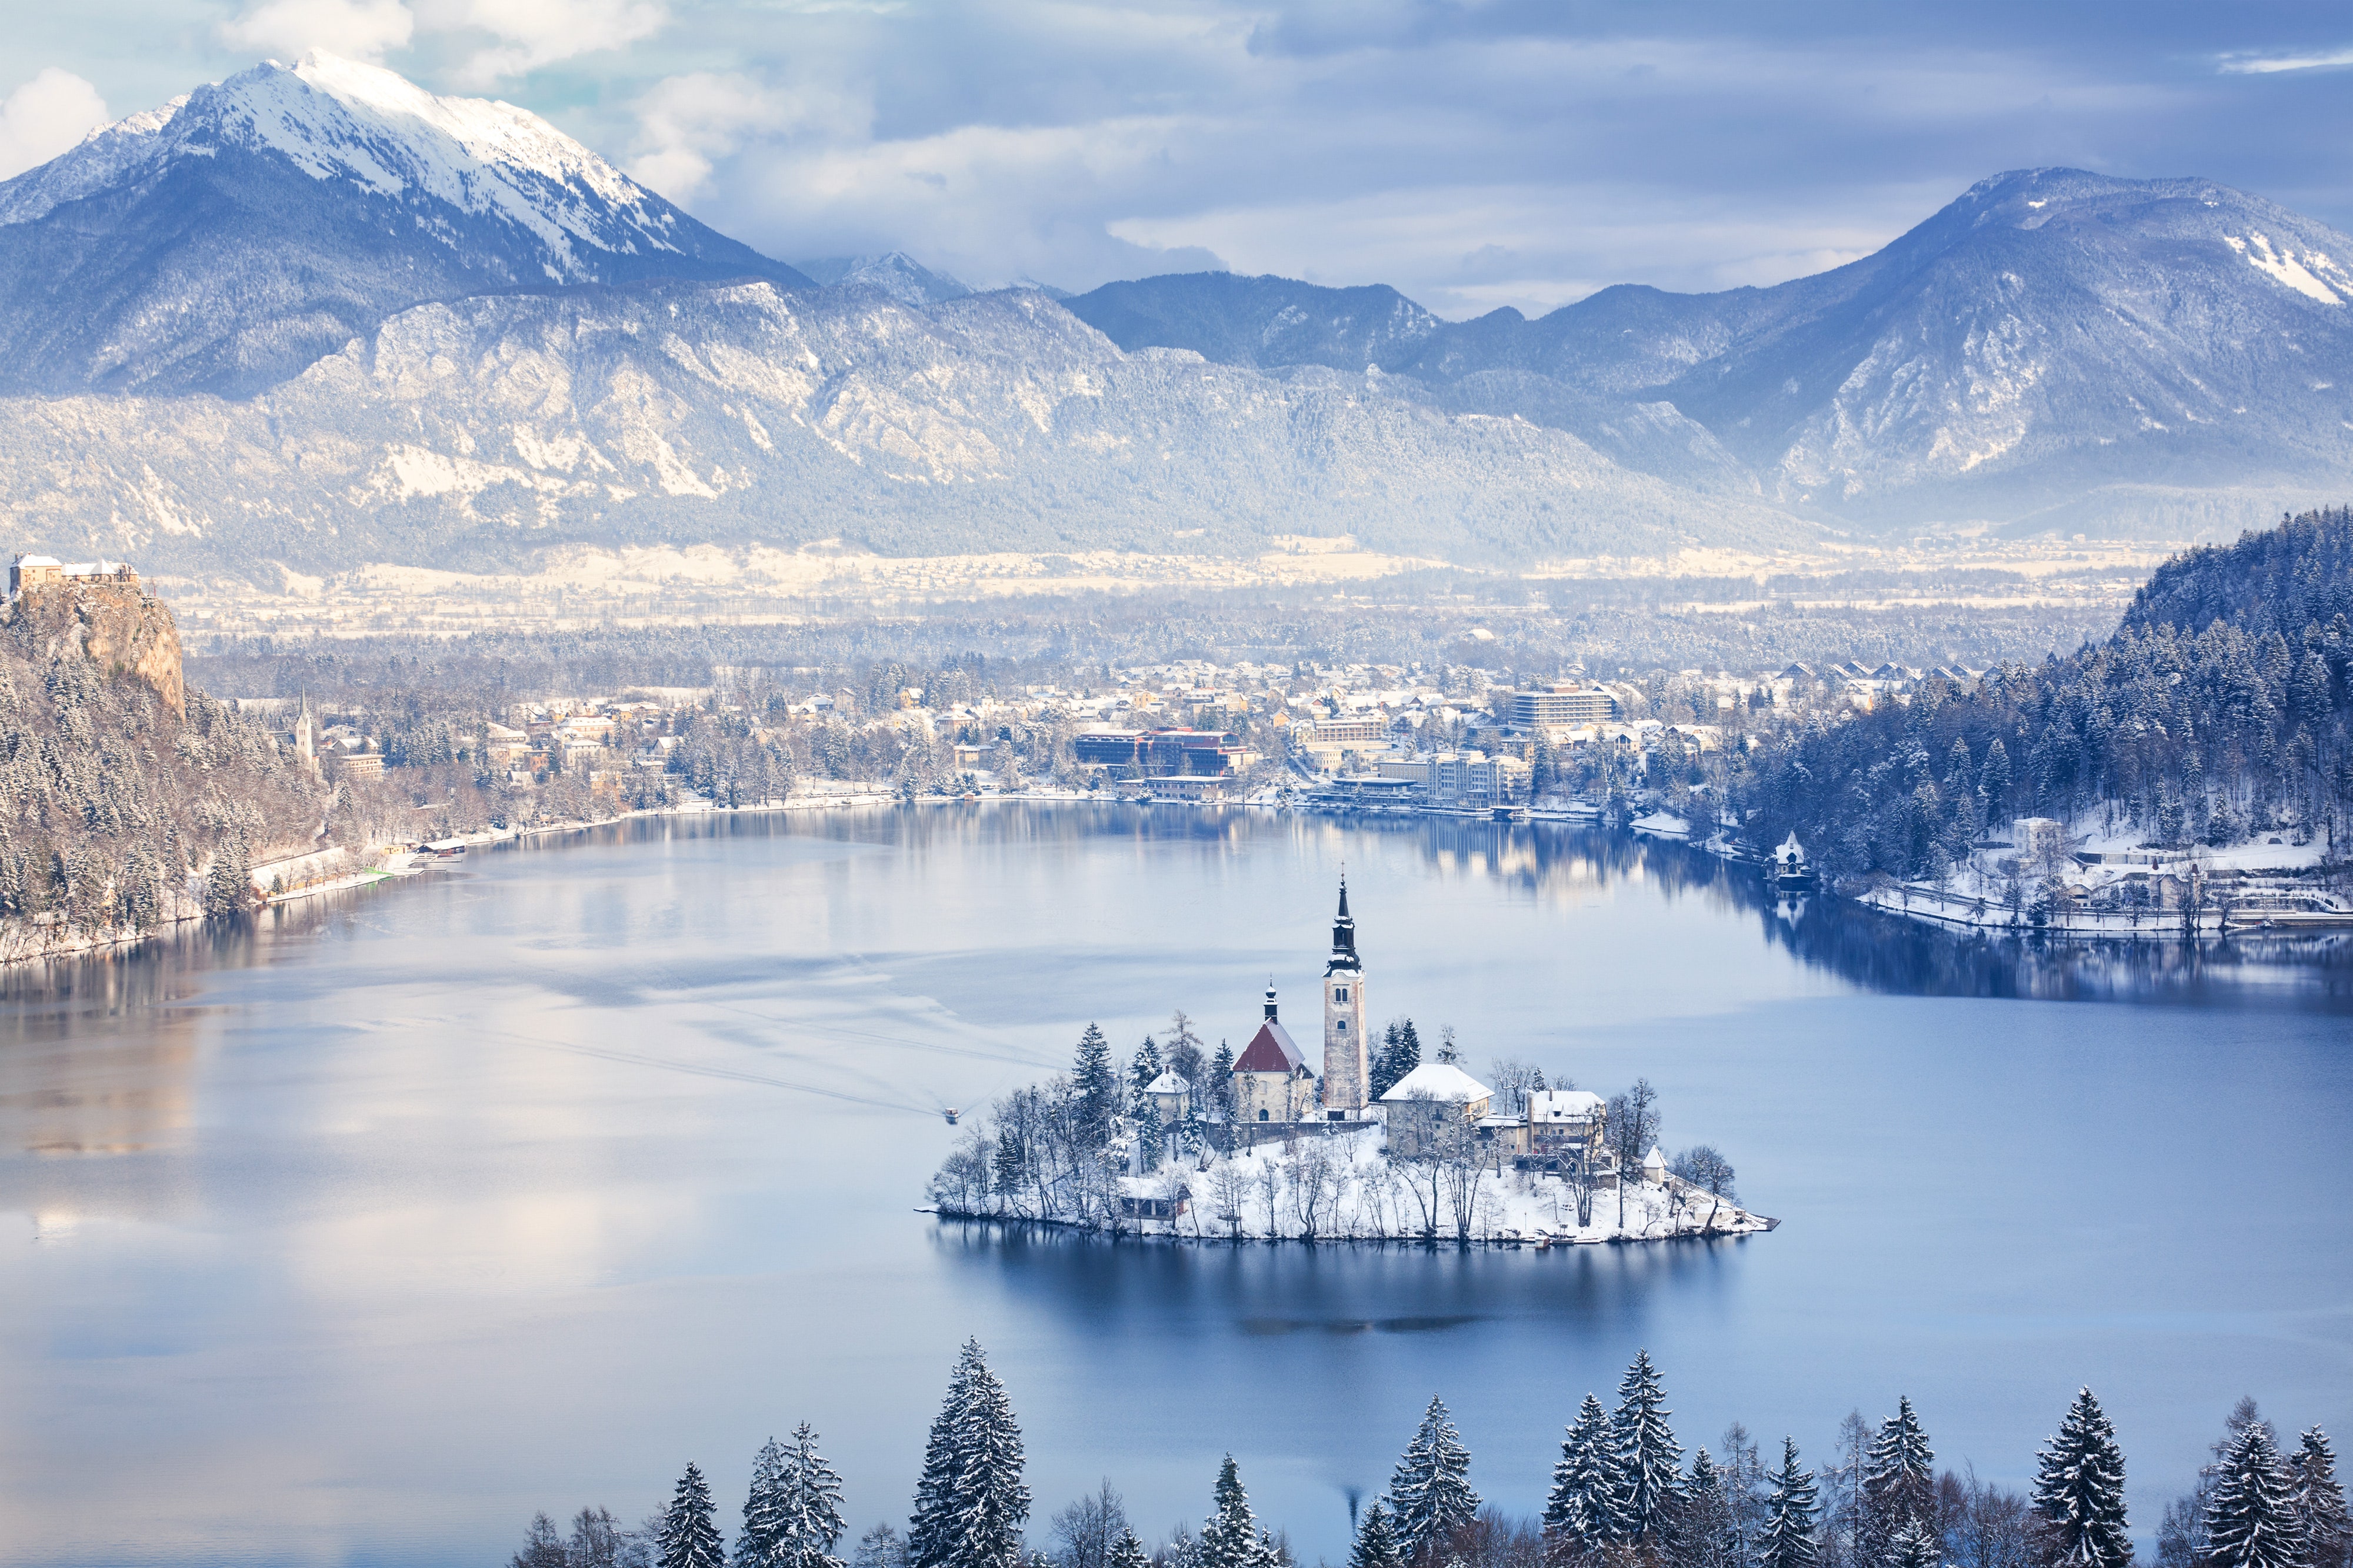 With its church-dotted islet and waters begging for rowboat rides, it’s no wonder <a href="https://www.cntraveler.com/gallery/best-places-to-visit-in-slovenia?mbid=synd_msn_rss&utm_source=msn&utm_medium=syndication">Lake Bled</a> is one of the most popular destinations in Slovenia. The site gets even more postcard-worthy when the surrounding Julian Alps become covered with snow and a fog settles over the lake.<p>Sign up to receive the latest news, expert tips, and inspiration on all things travel</p><a href="https://www.cntraveler.com/newsletter/the-daily?sourceCode=msnsend">Inspire Me</a>